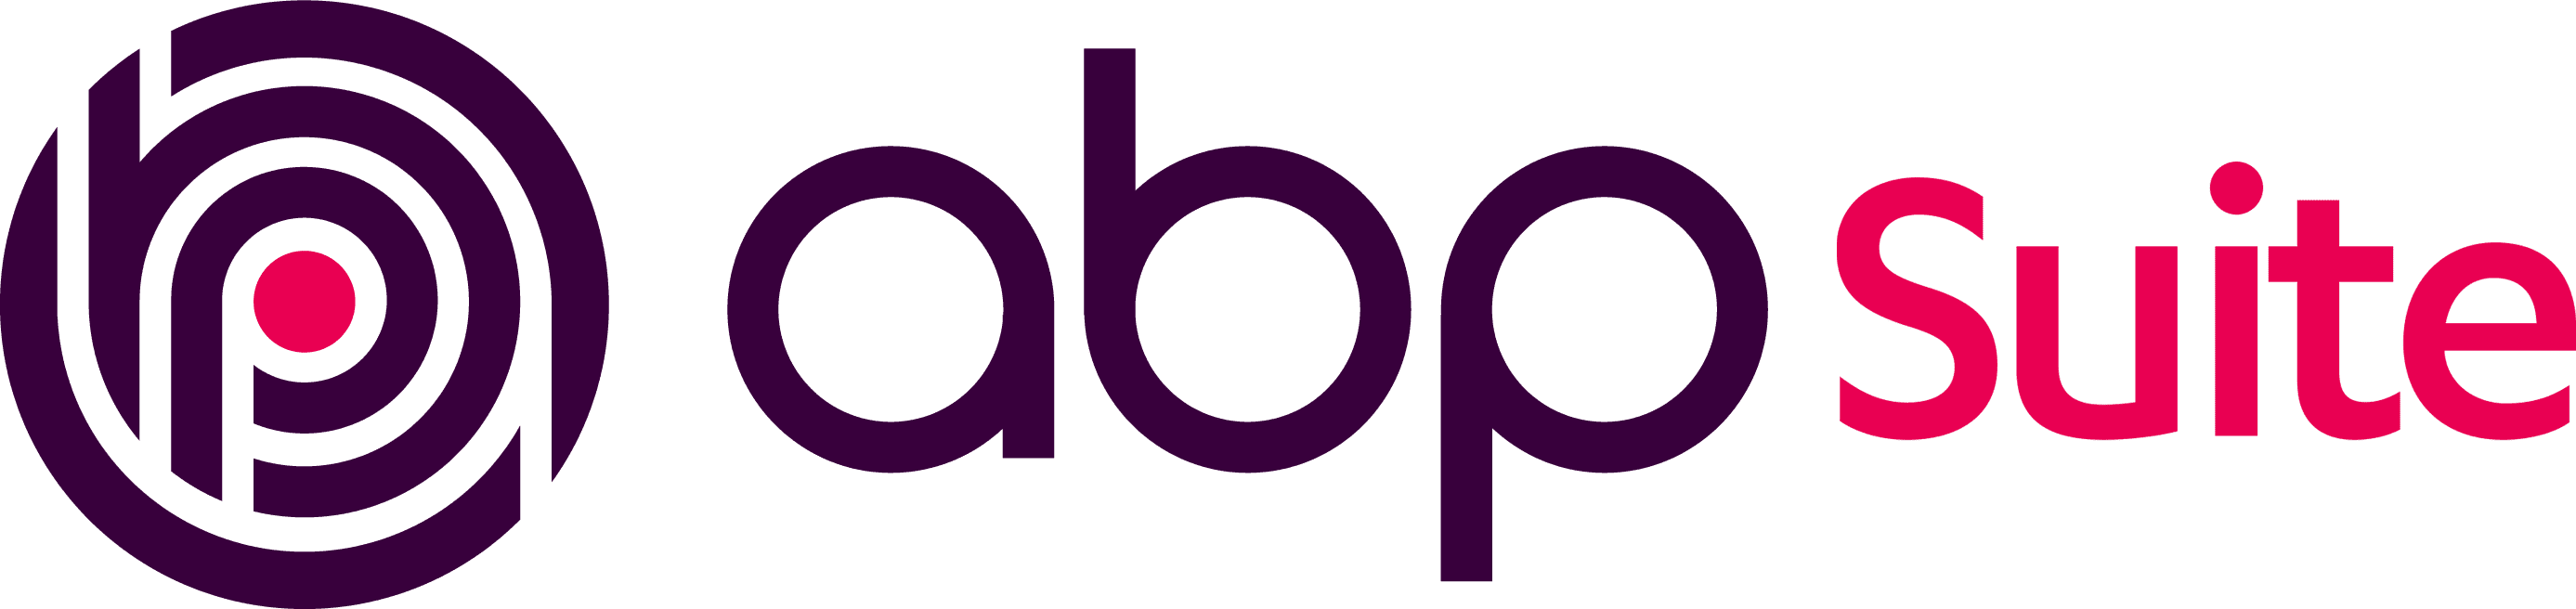 Abp Framework Abp Commercial 3 2 Rc With The New Blazor Ui Abp Io www